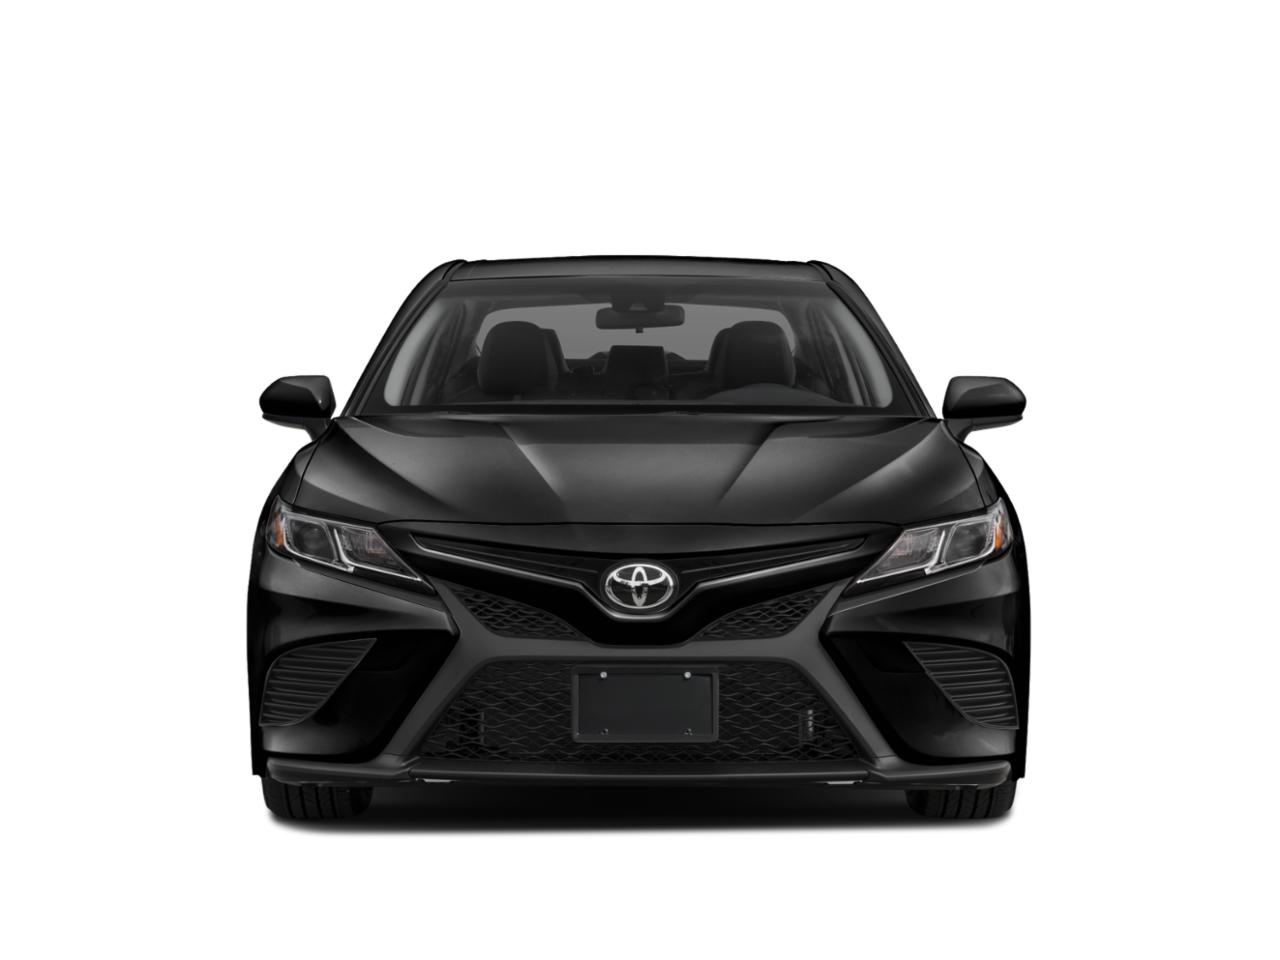 2019 Toyota Camry Vehicle Photo in Winter Park, FL 32792